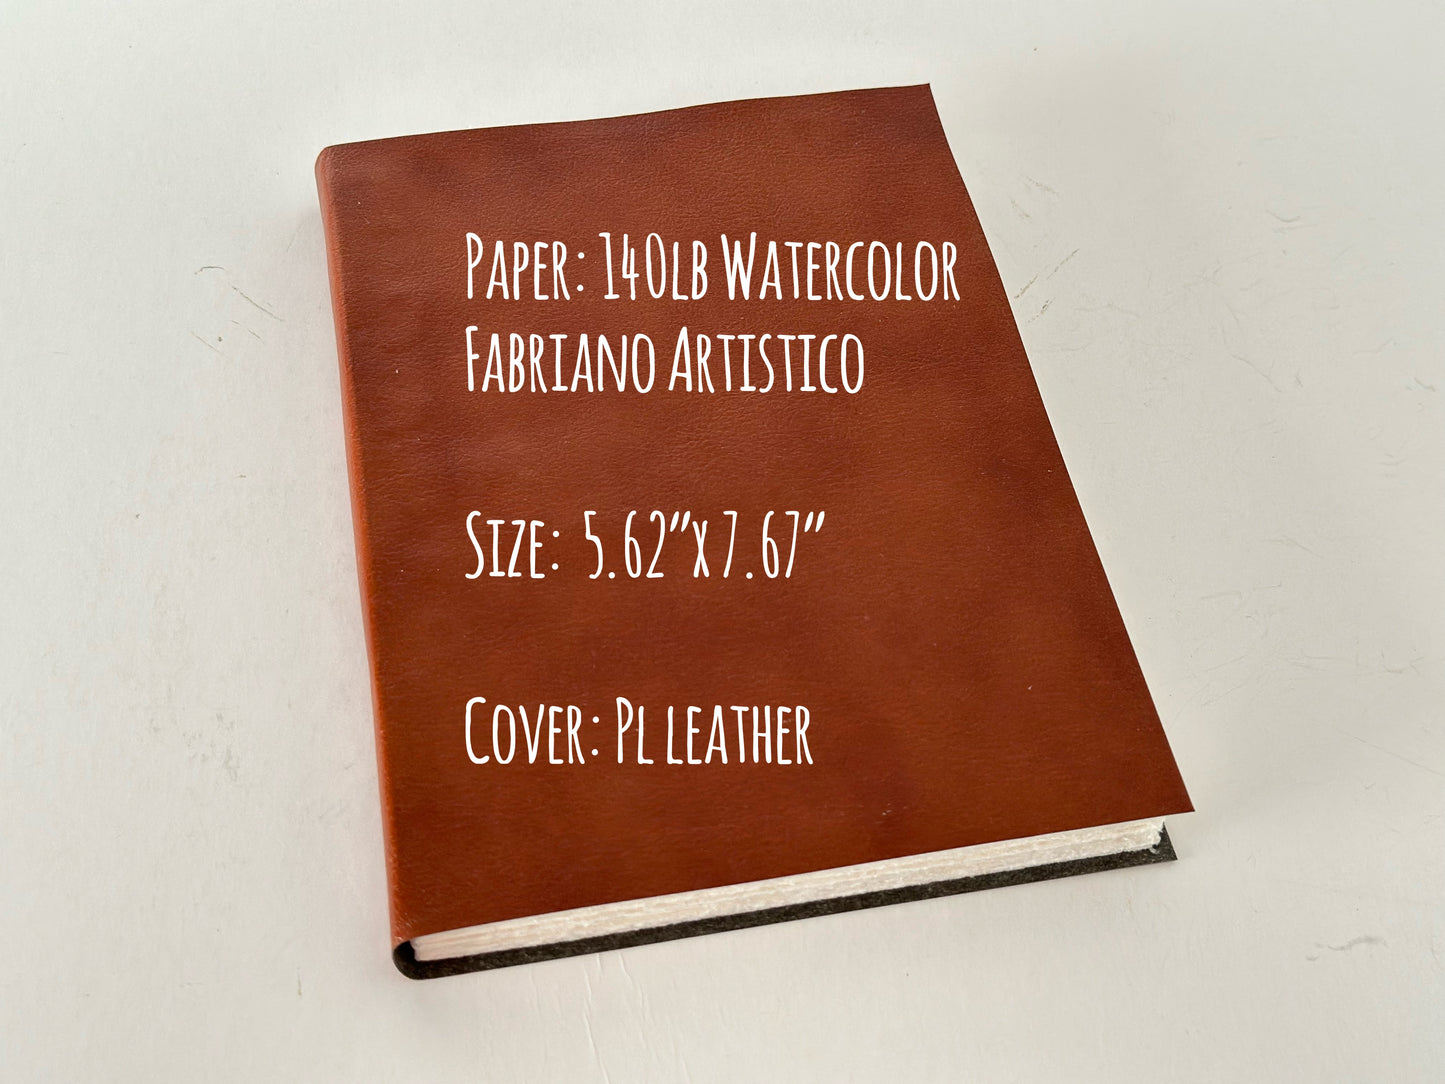 Watercolor Softcover Sketchbook with Fabriano Cotton Hot Pressed Paper and PL Leather Cover, Travel Journal Gift for Botanical Urban Artist